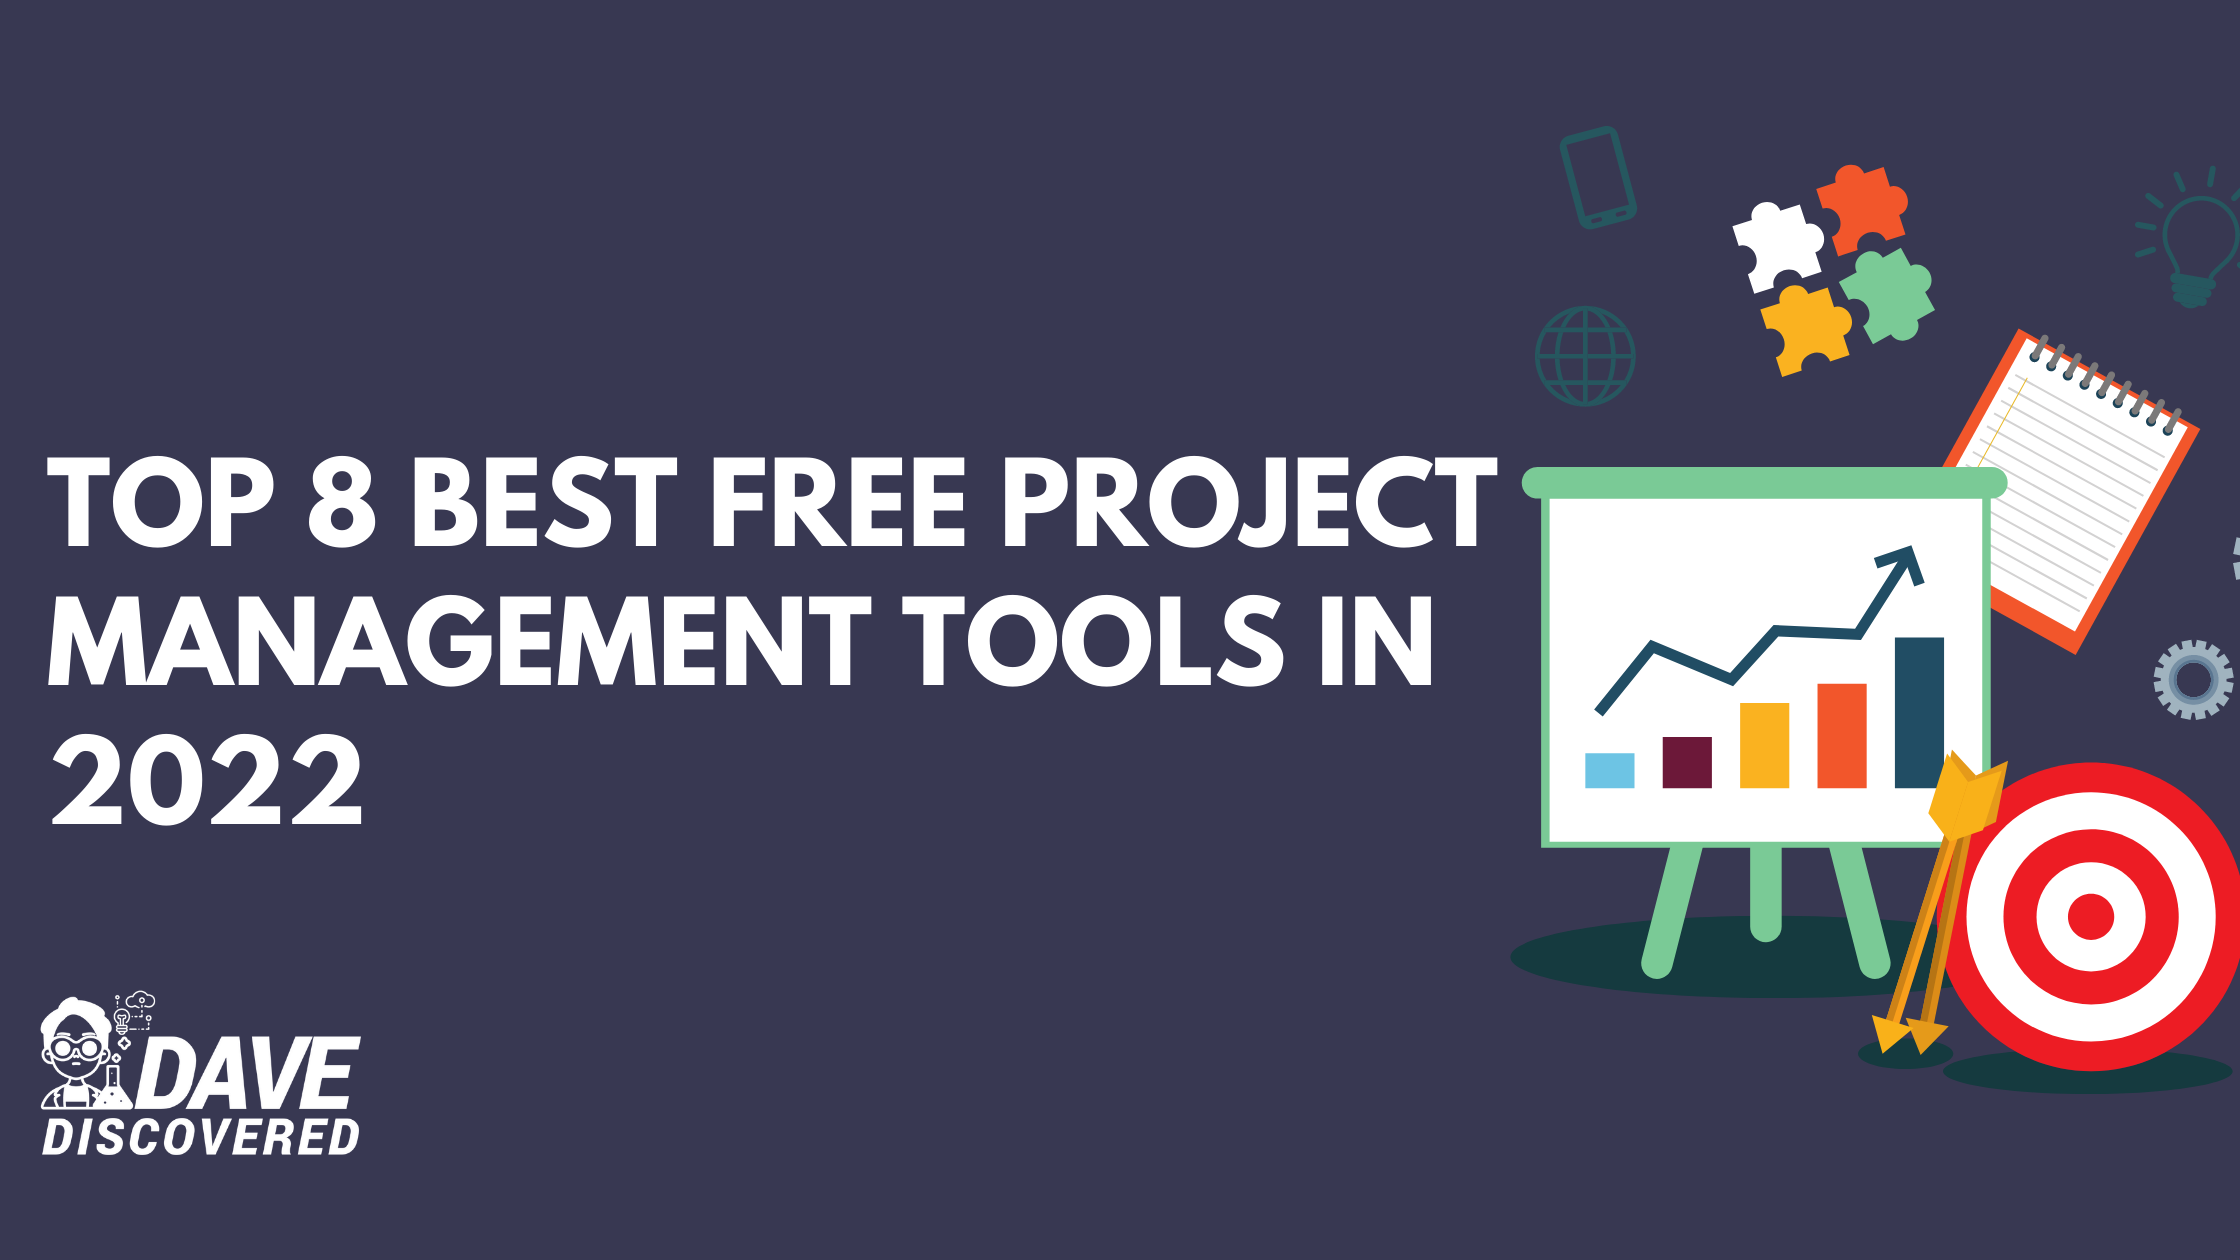 Top 8 Best Free Project Management Tools